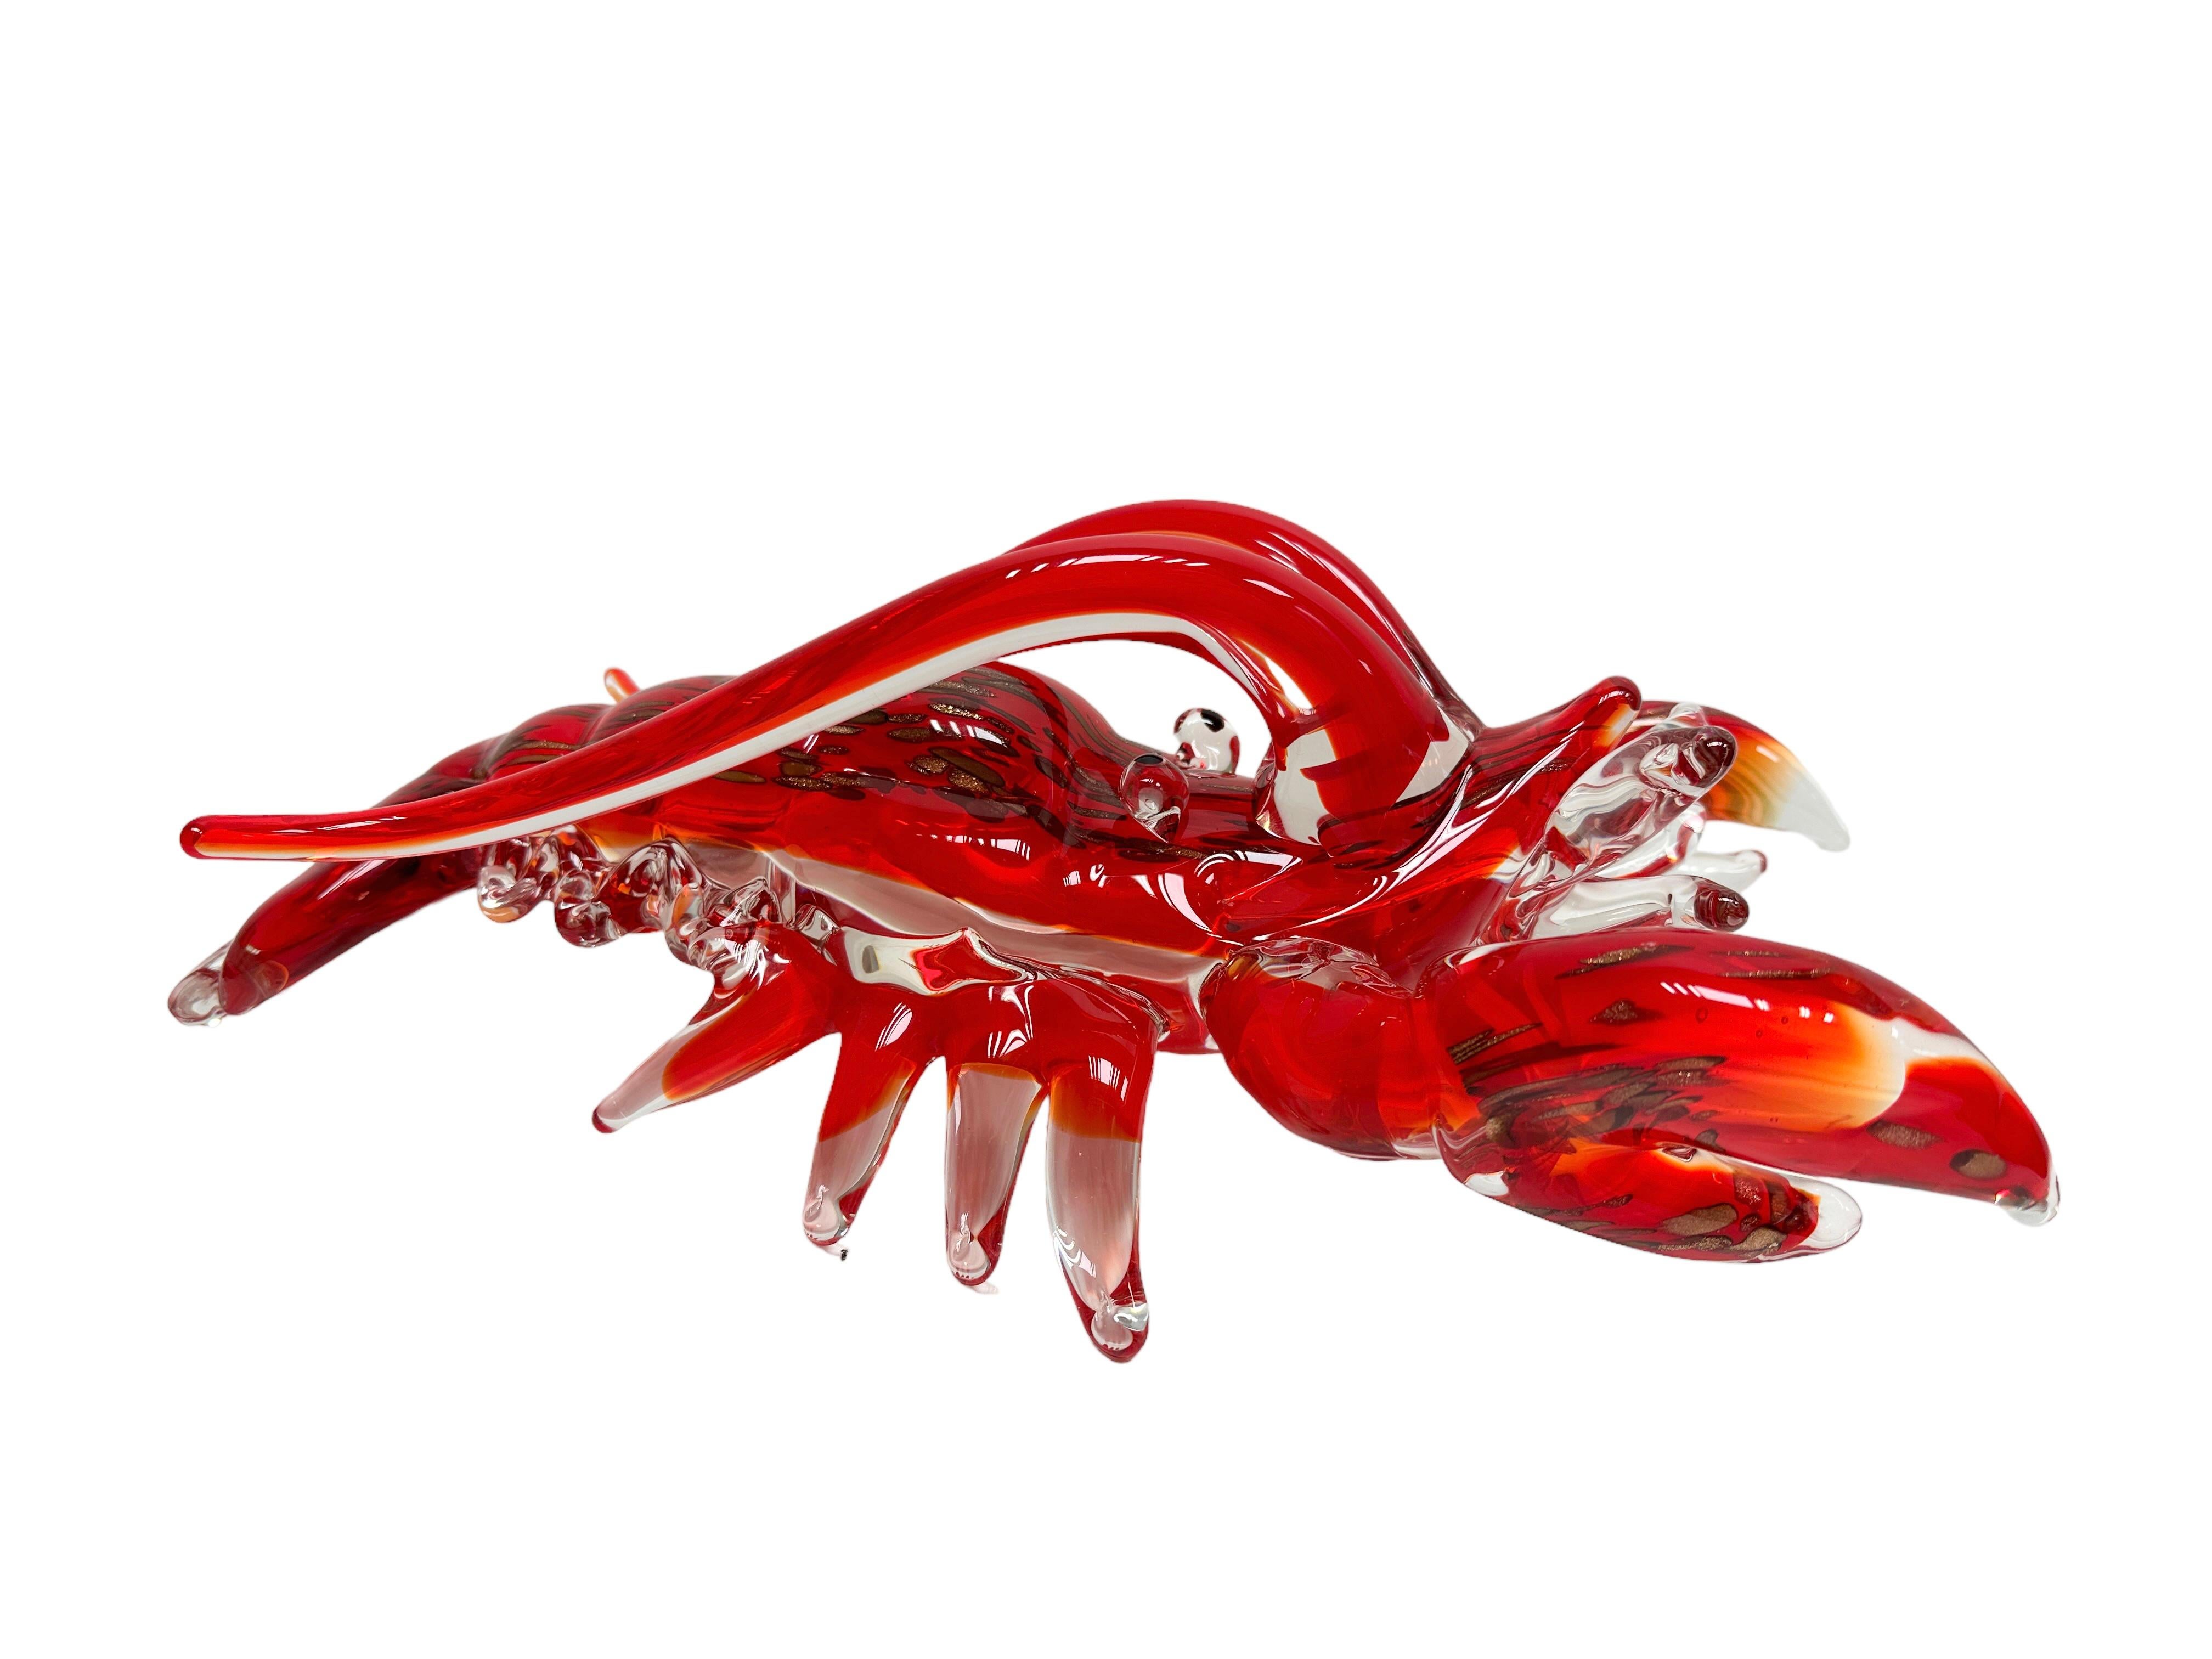 This Murano glass lobster statue was most likely made in the 1980s in Italy. Murano glass is a type of glass that is made on the Venetian island of Murano, located in the northern part of the Venetian lagoon. It is known for its intricate and